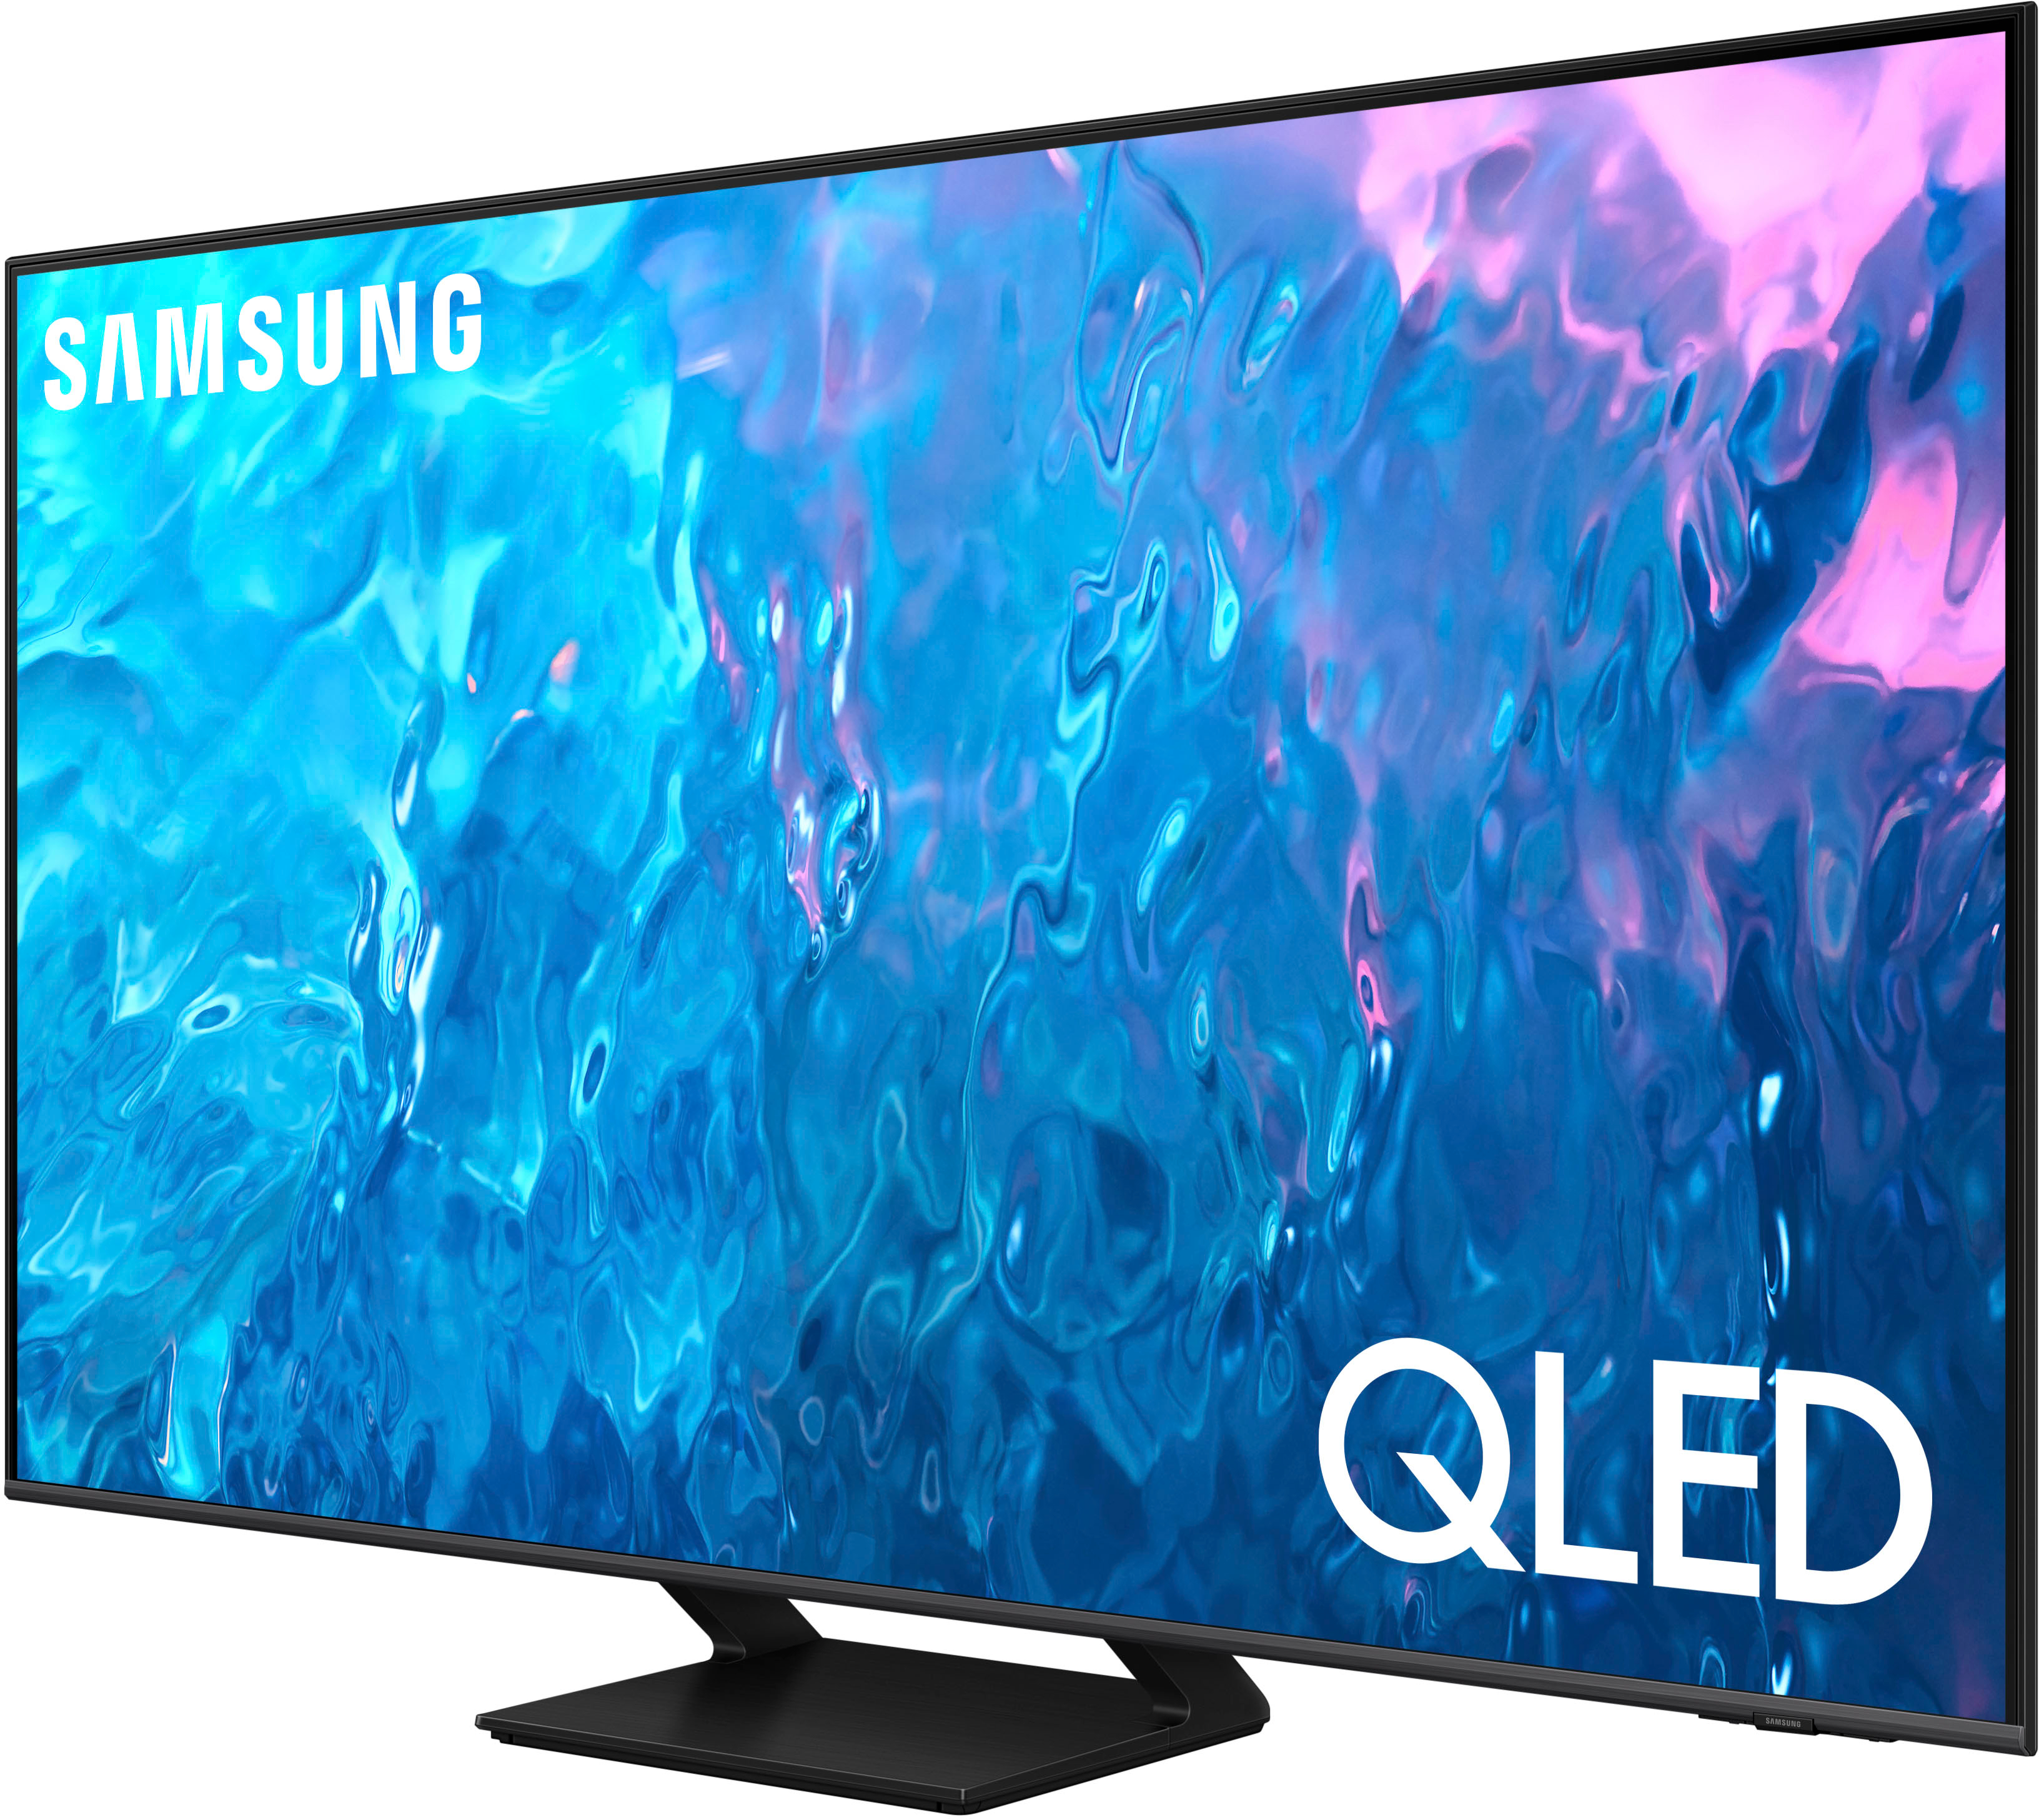 Samsung 55 Class - Q60C Series - 4K UHD QLED LCD TV - Allstate 3-Year  Protection Plan Bundle Included For 5 Years Of Total Coverage*